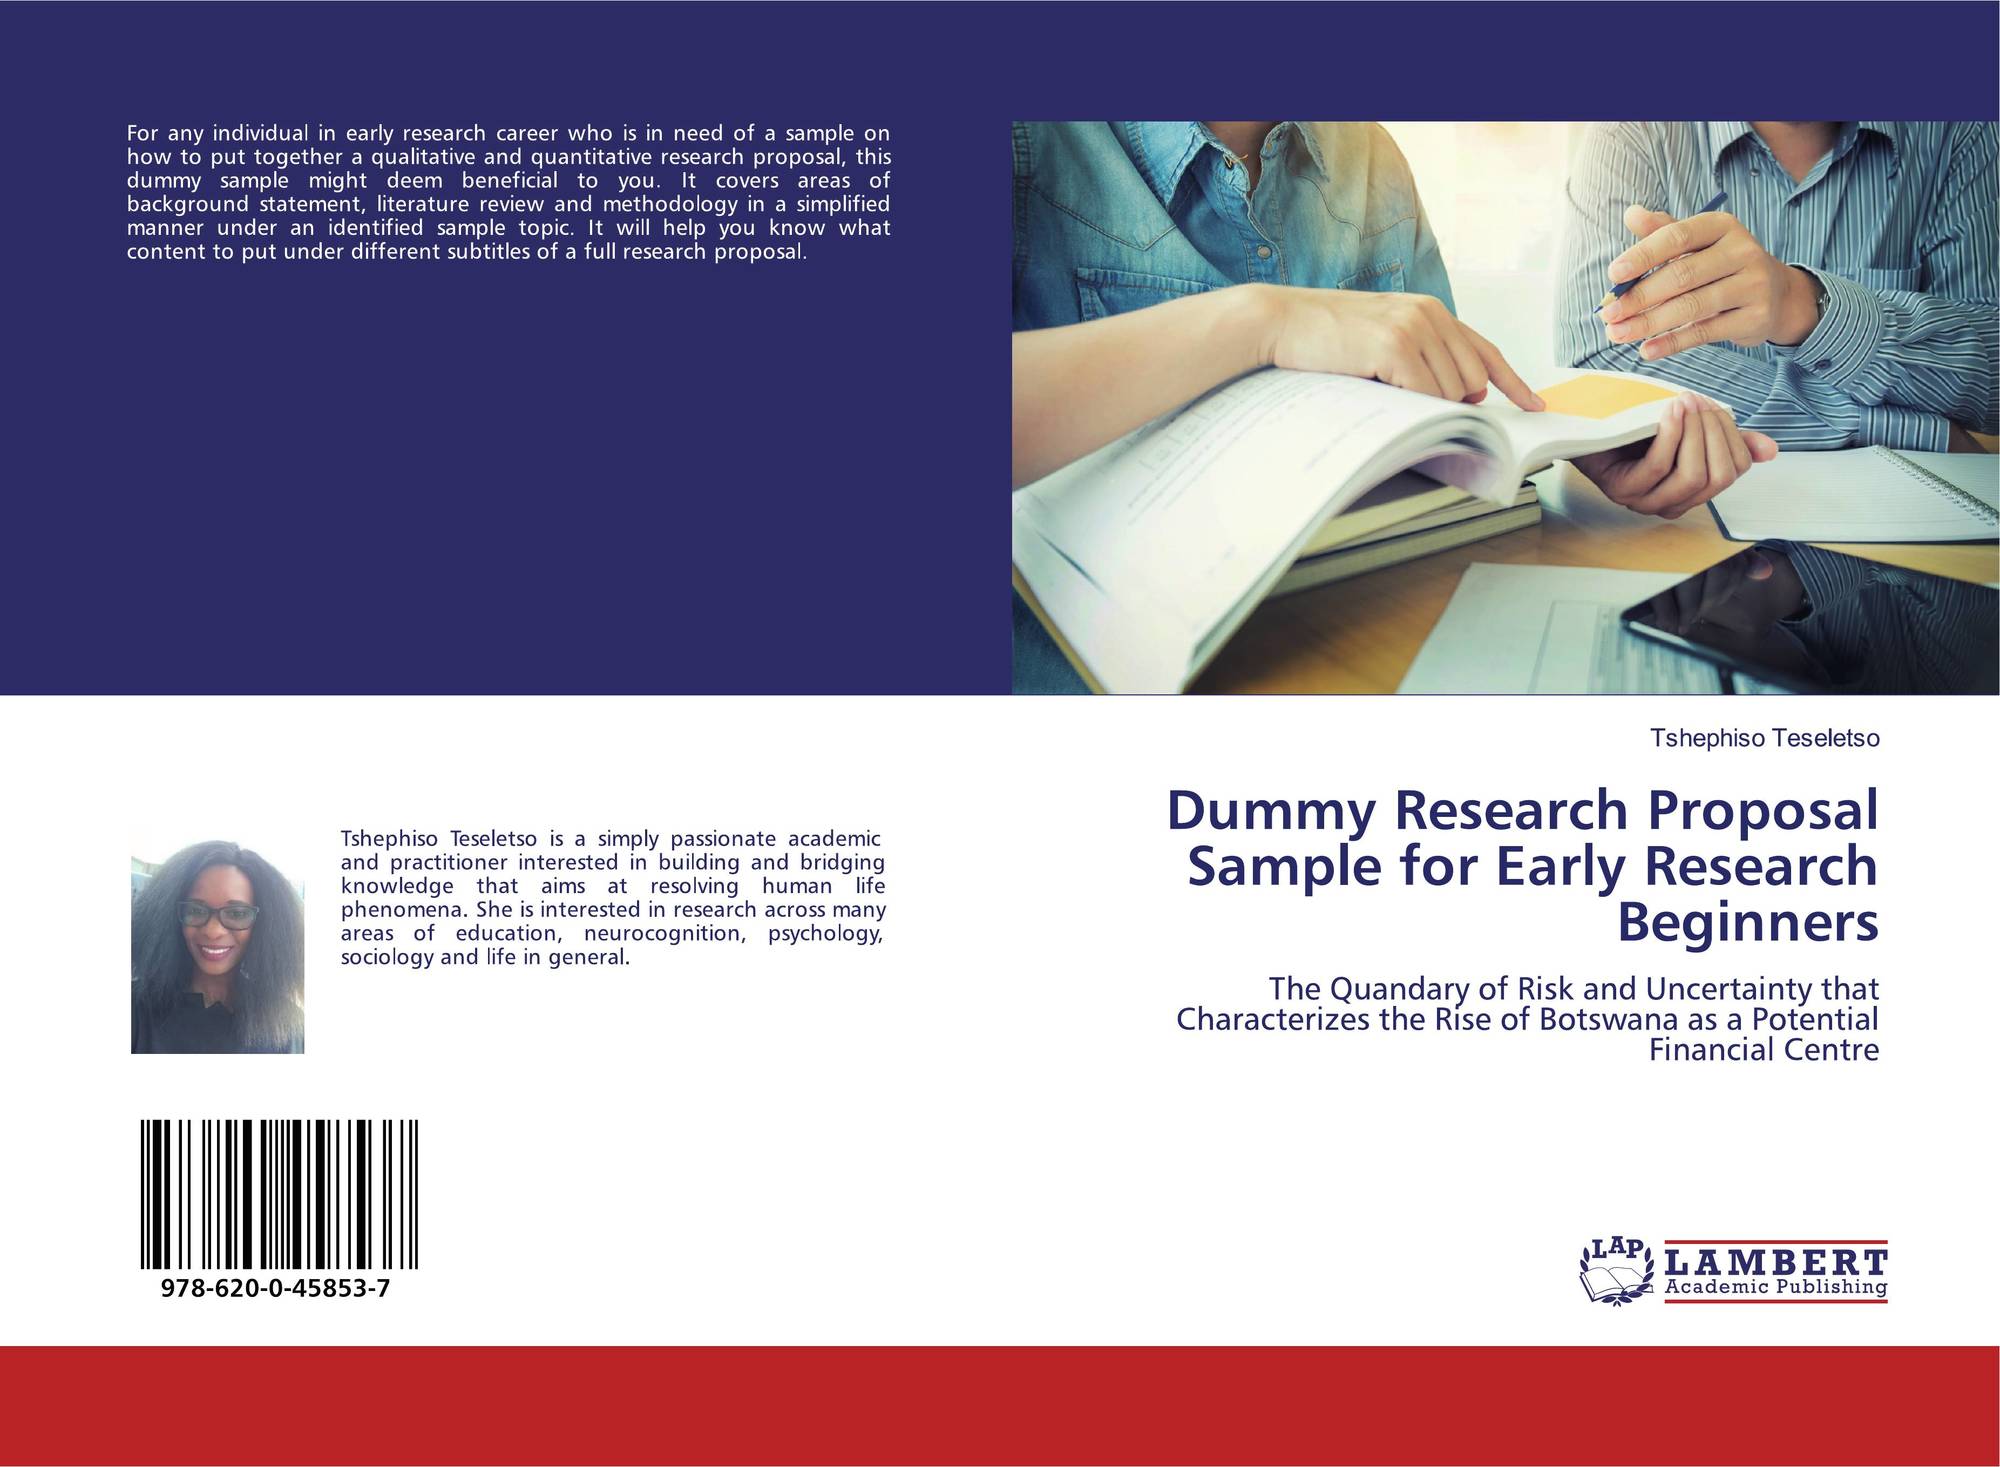 Dummy Research Proposal Sample for Early Research Beginners, 16